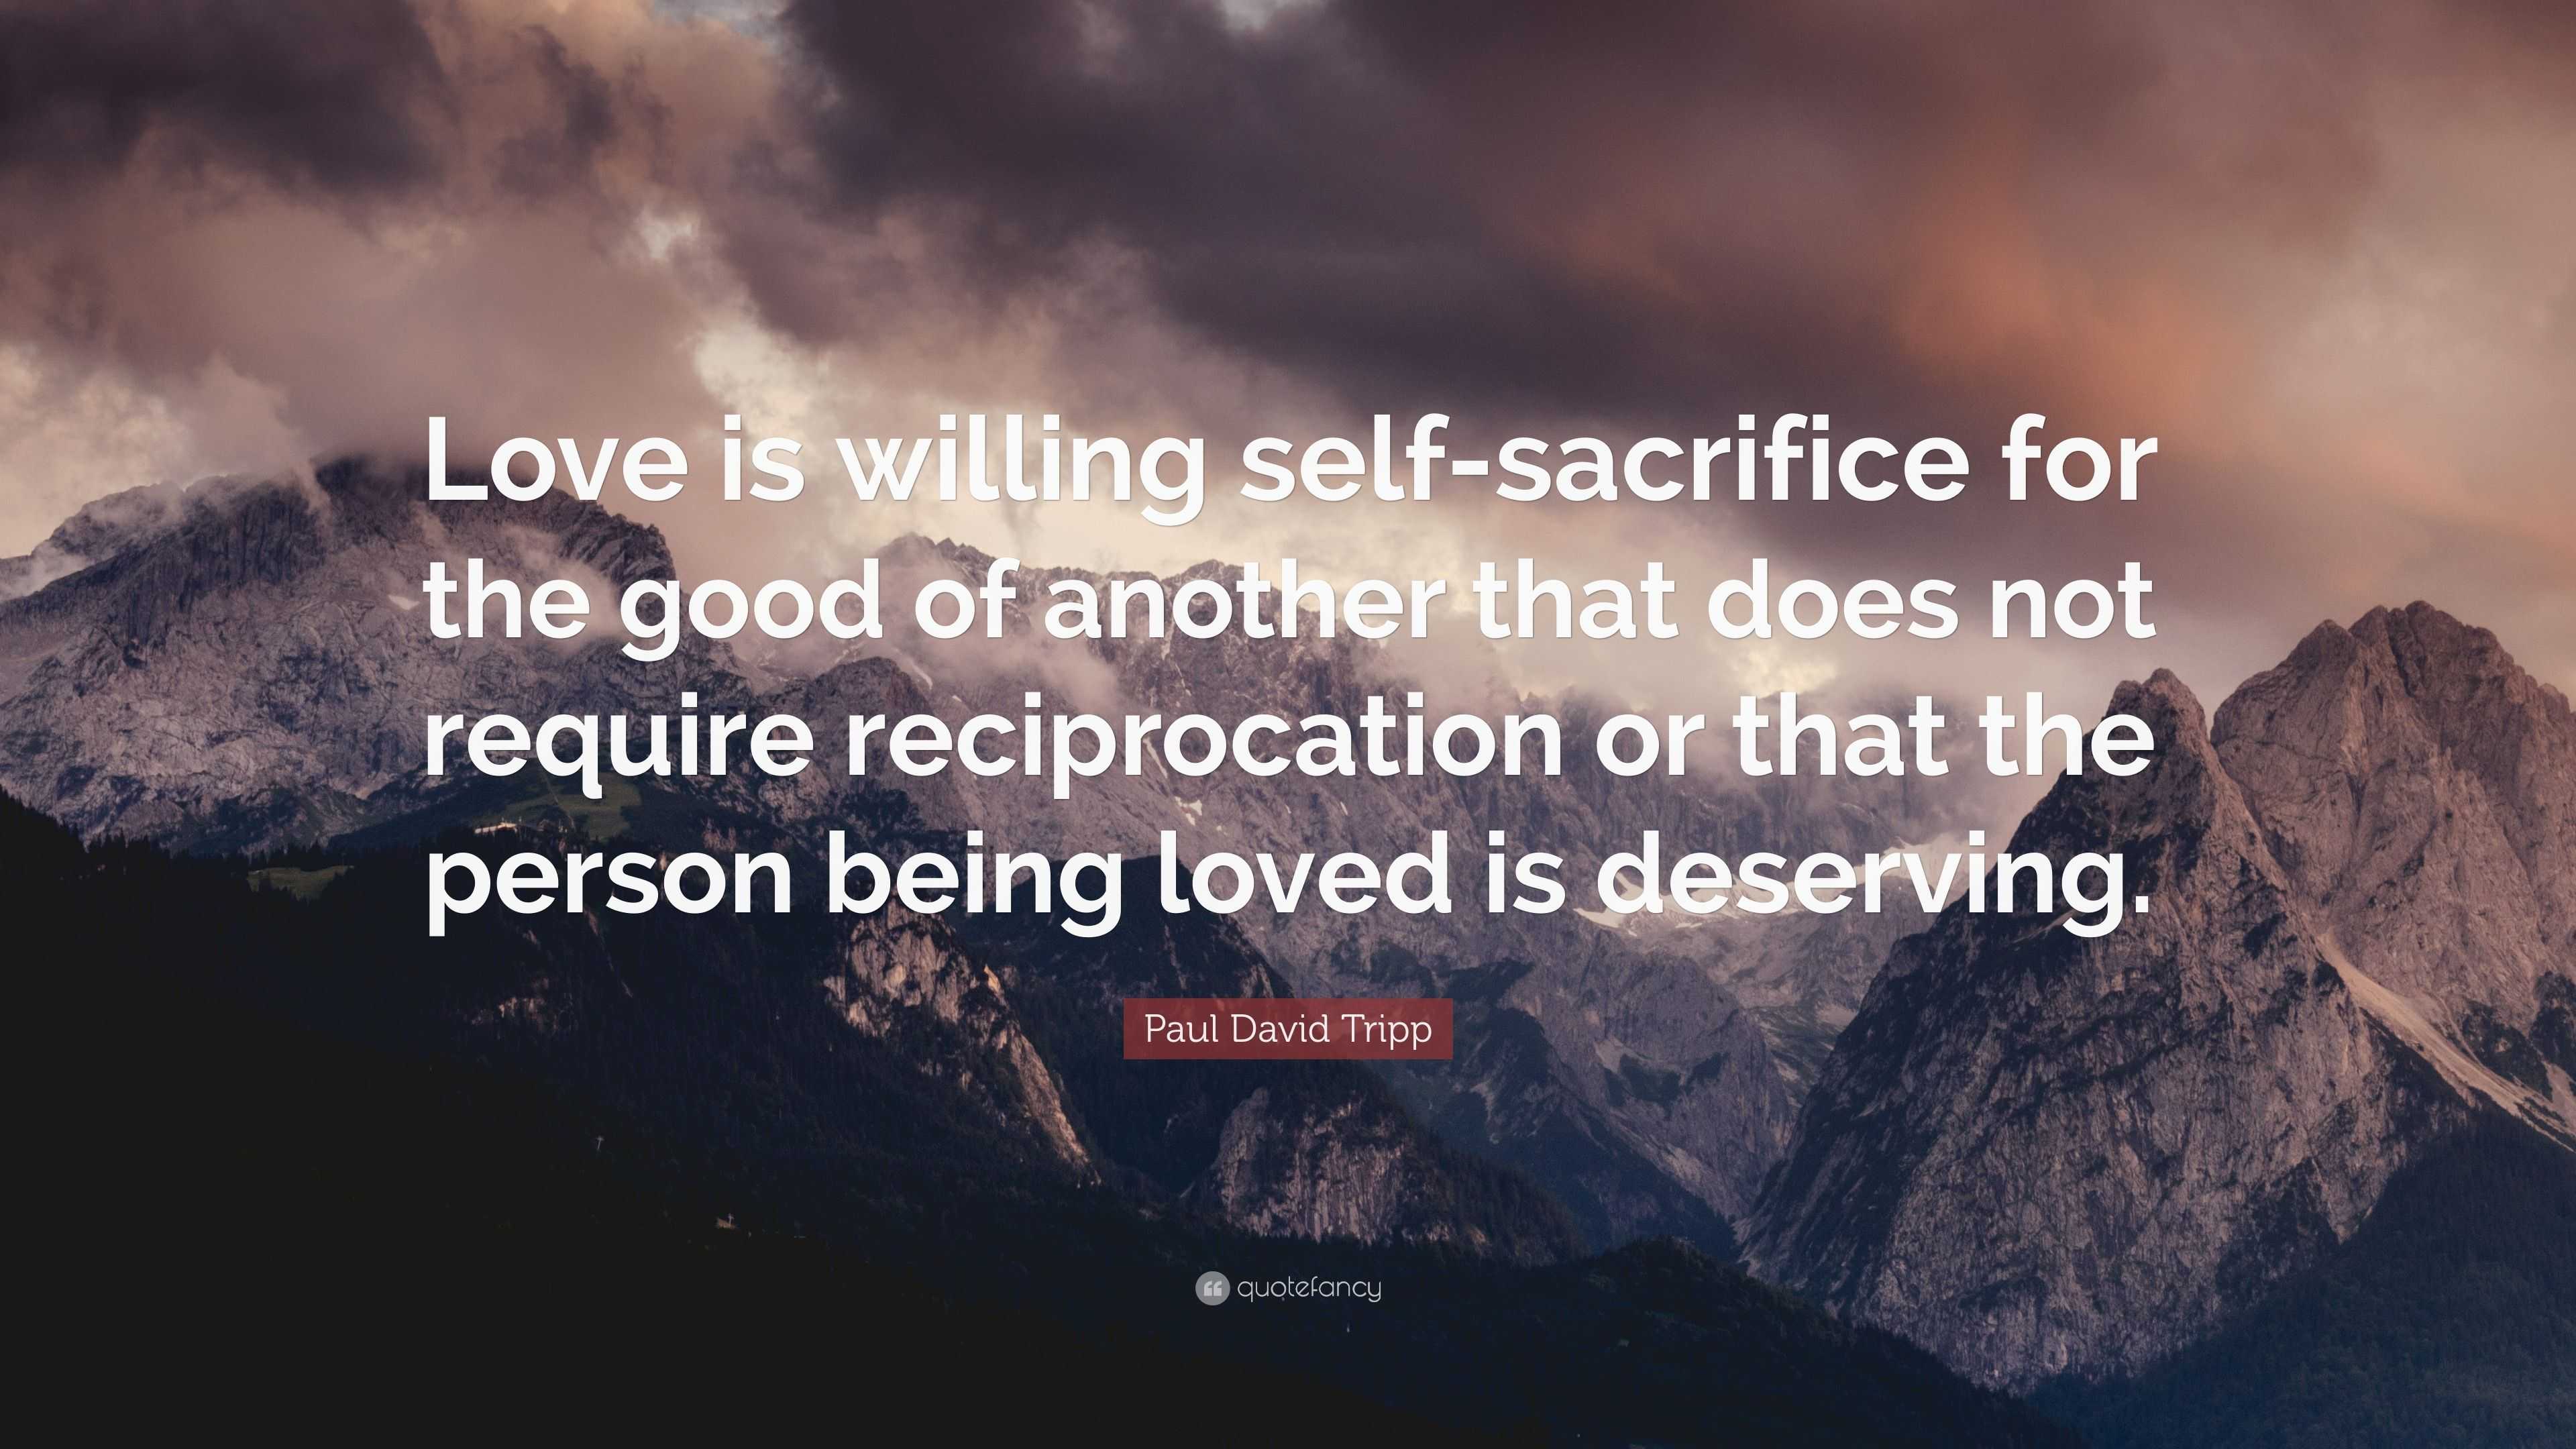 Paul David Tripp Quote: “Love is willing self-sacrifice for the good of ...